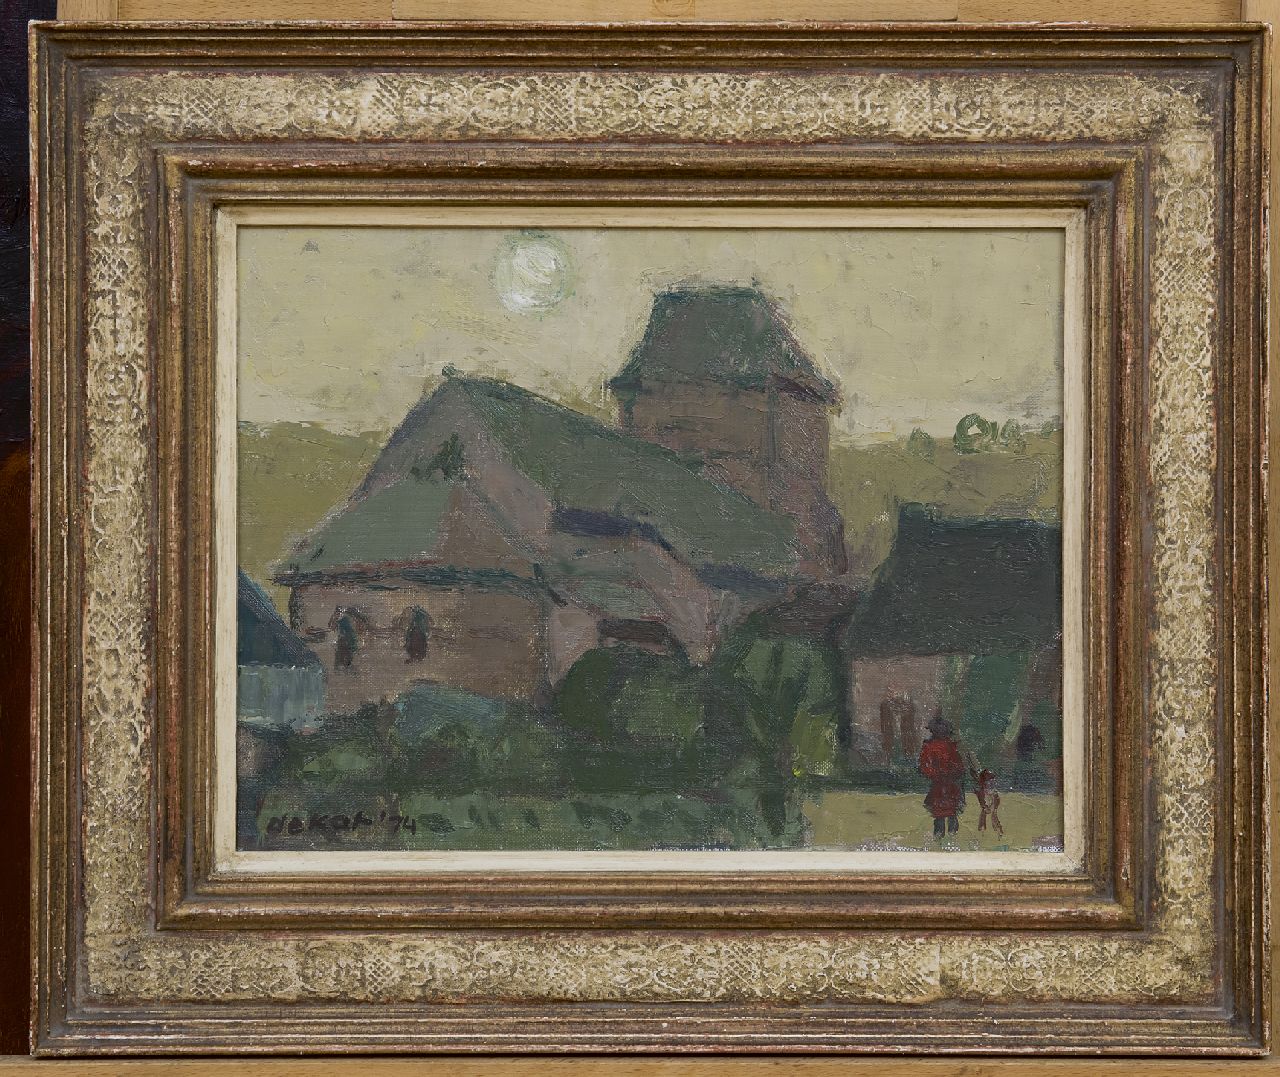 Kat O.B. de | 'Otto' Boudewijn de Kat | Paintings offered for sale | Church of Saint-Hippolyte, France, oil on canvas 29.5 x 38.6 cm, signed l.l. and dated '74